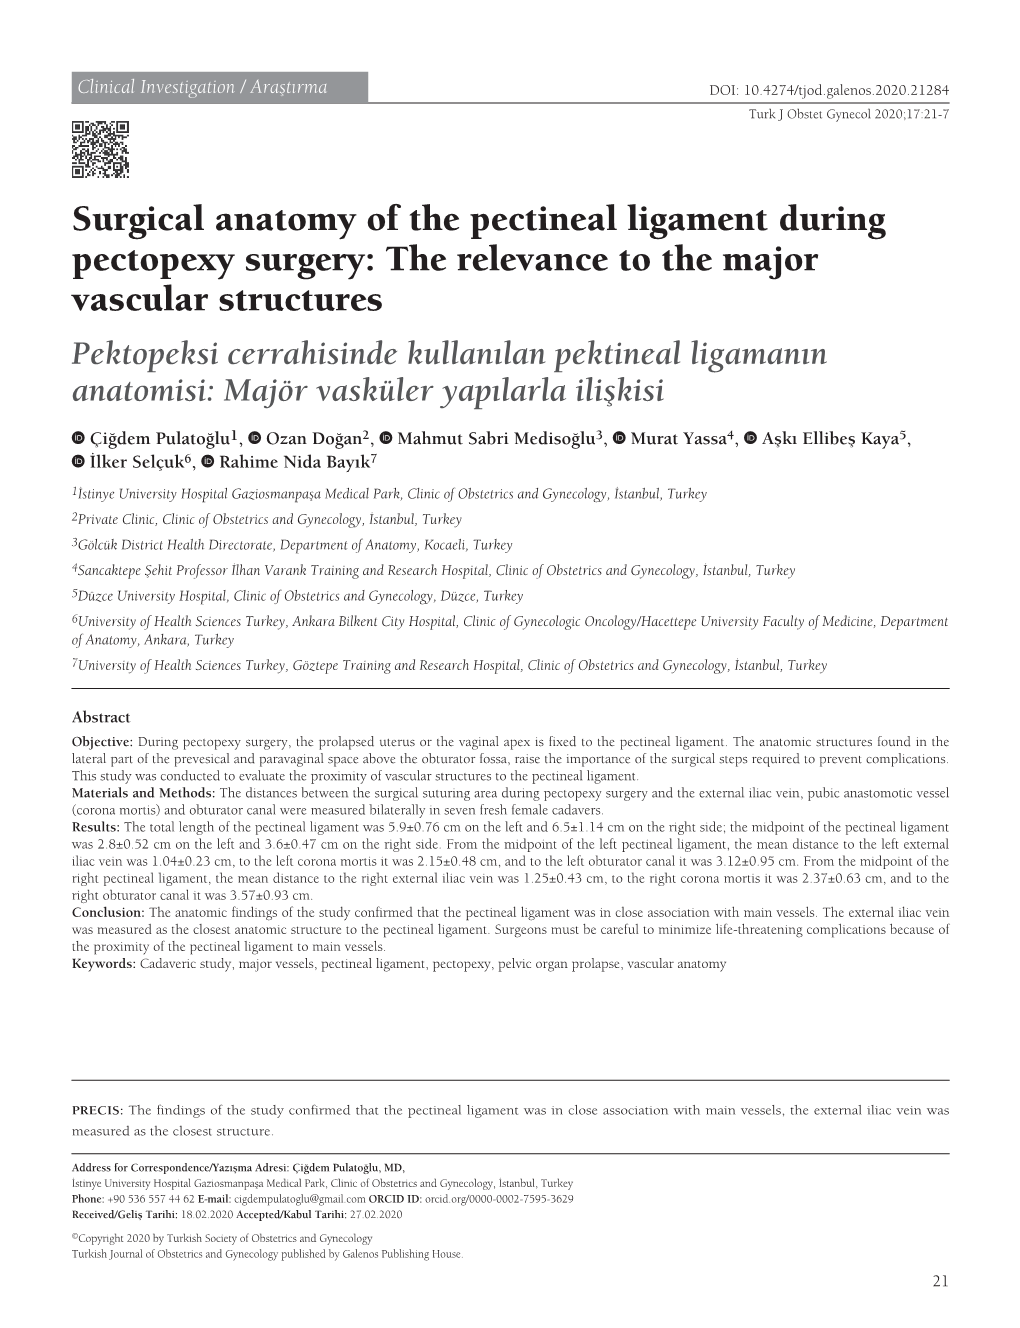 Surgical Anatomy of the Pectineal Ligament During Pectopexy Surgery